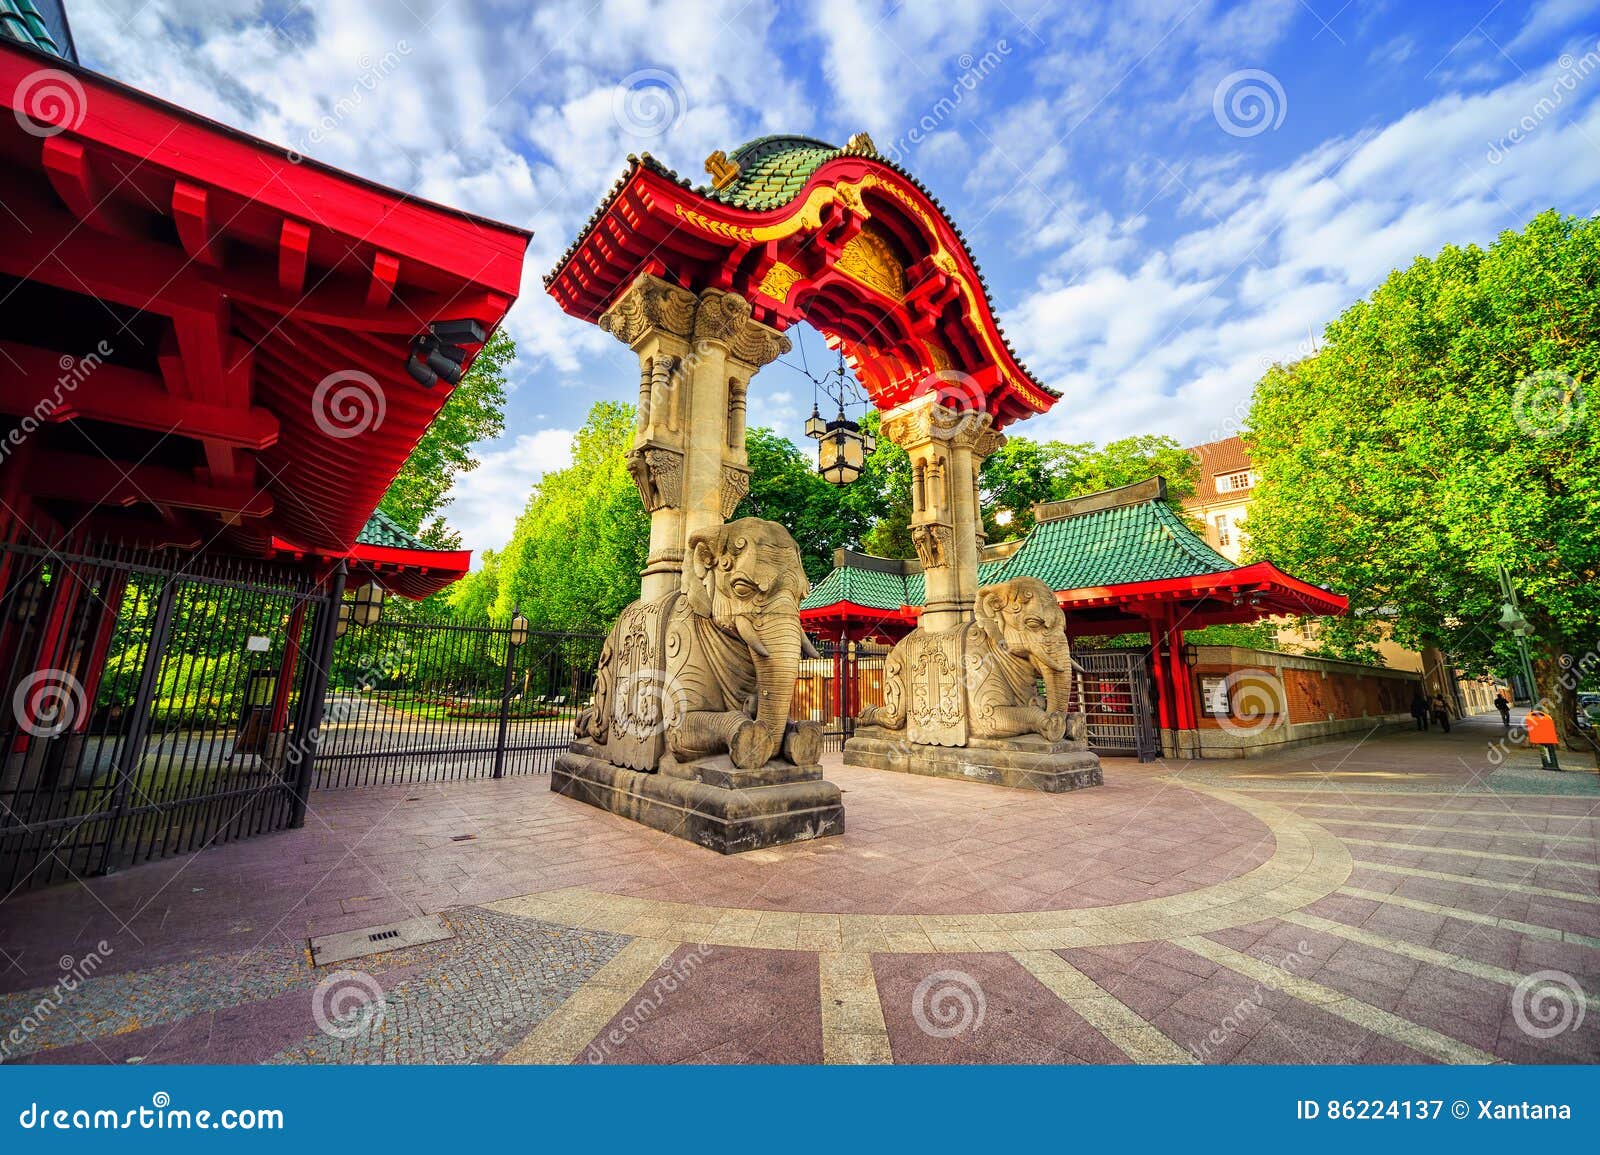 entrance to the berlin zoological garden, germany